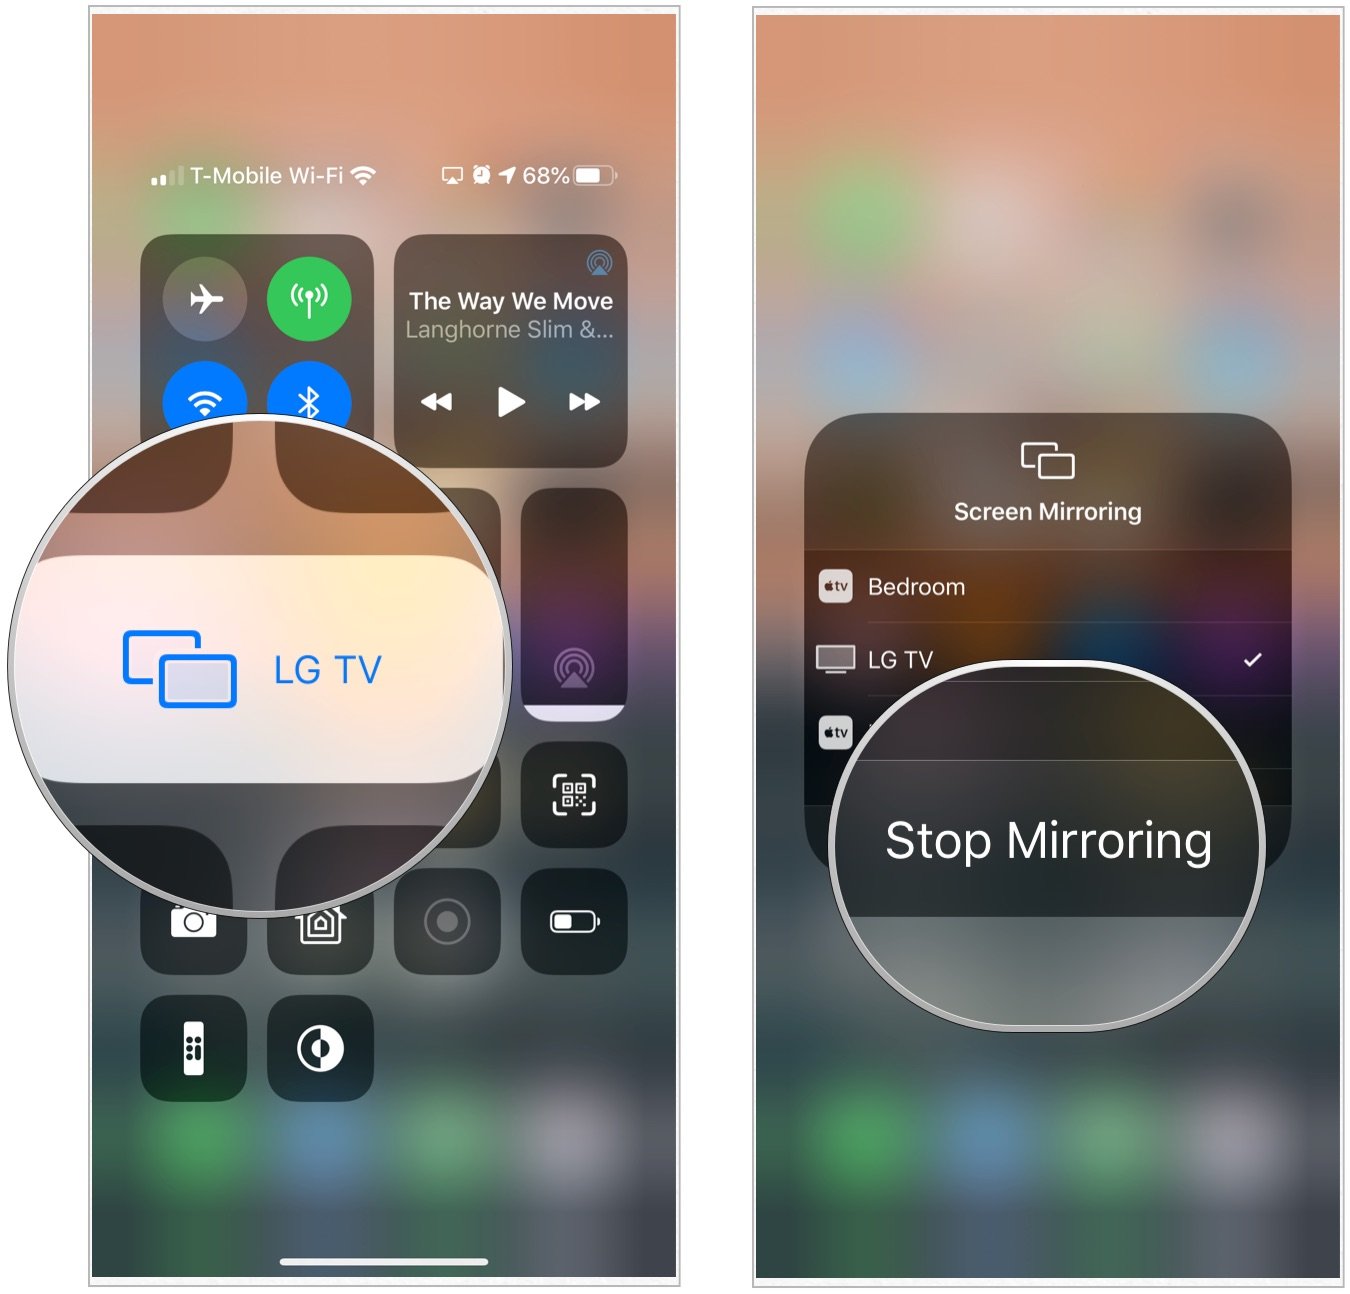 To stop mirroring, open Control Center, tap Screen Mirroring, then Stop Mirroring.